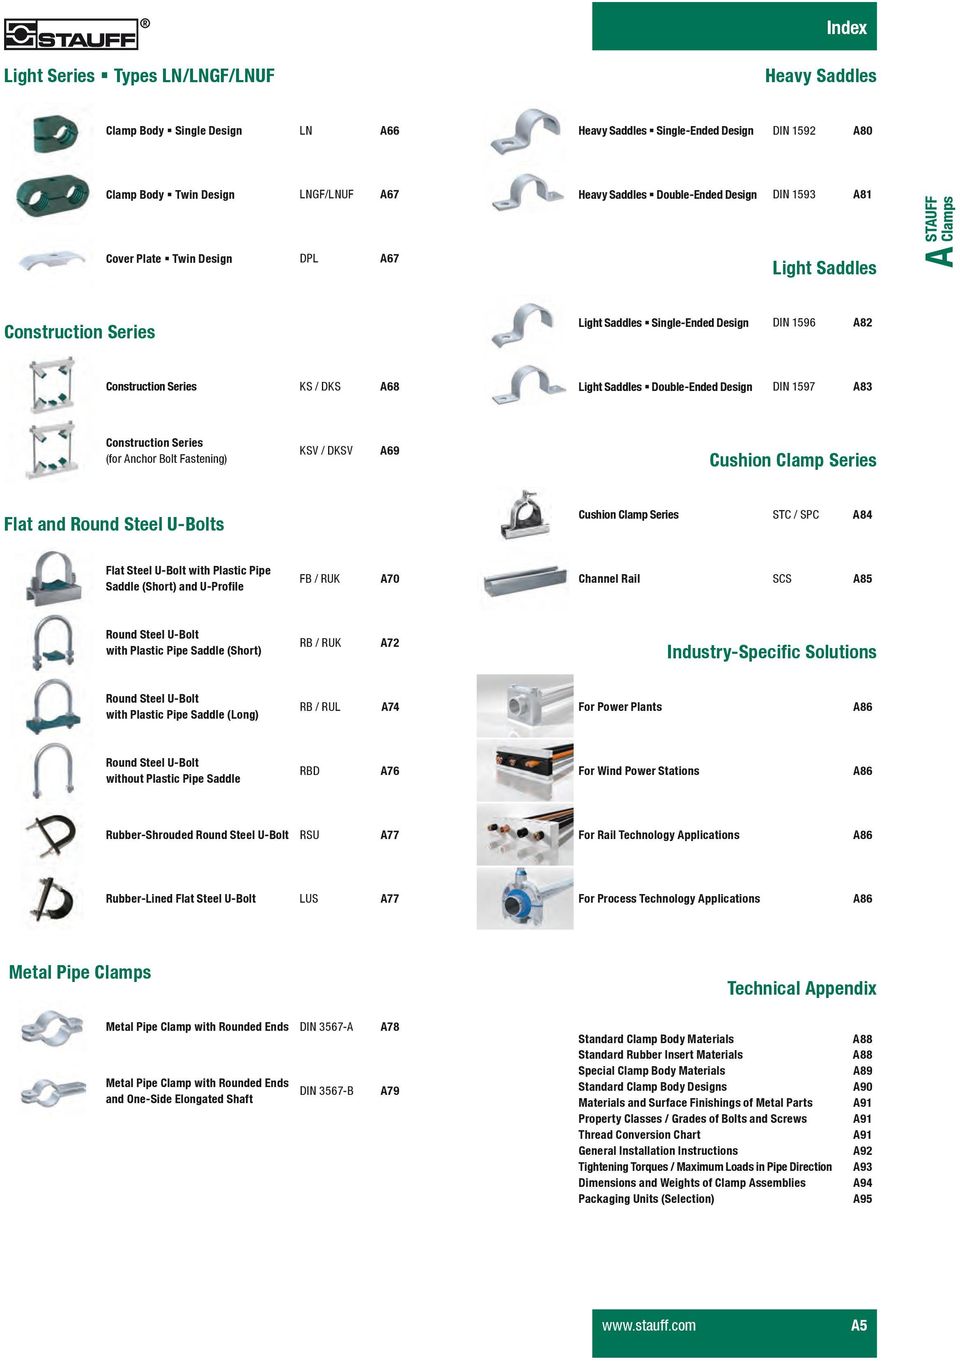 A83 Construction eries (for Anchor Bolt Fastening) KV / DKV A69 Cushion Clamp eries Flat and Round teel U-Bolts Cushion Clamp eries TC / PC A84 Flat teel U-Bolt with Plastic Pipe addle (hort) and